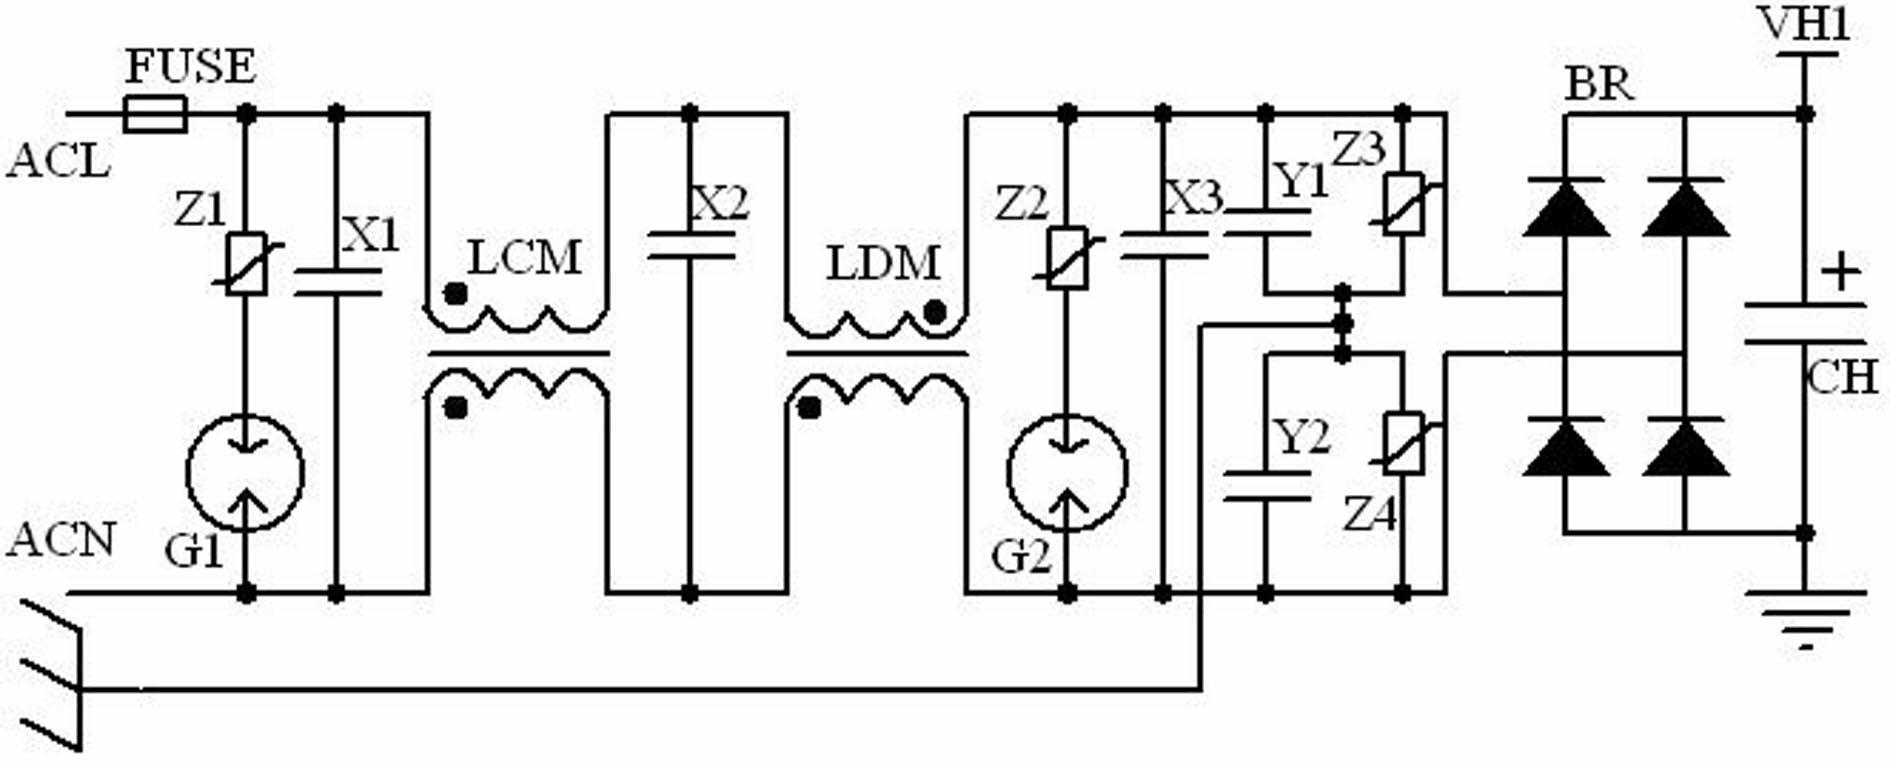 Self-protective variable frequency modulation ICP (Inductively Coupled Plasma) ballast